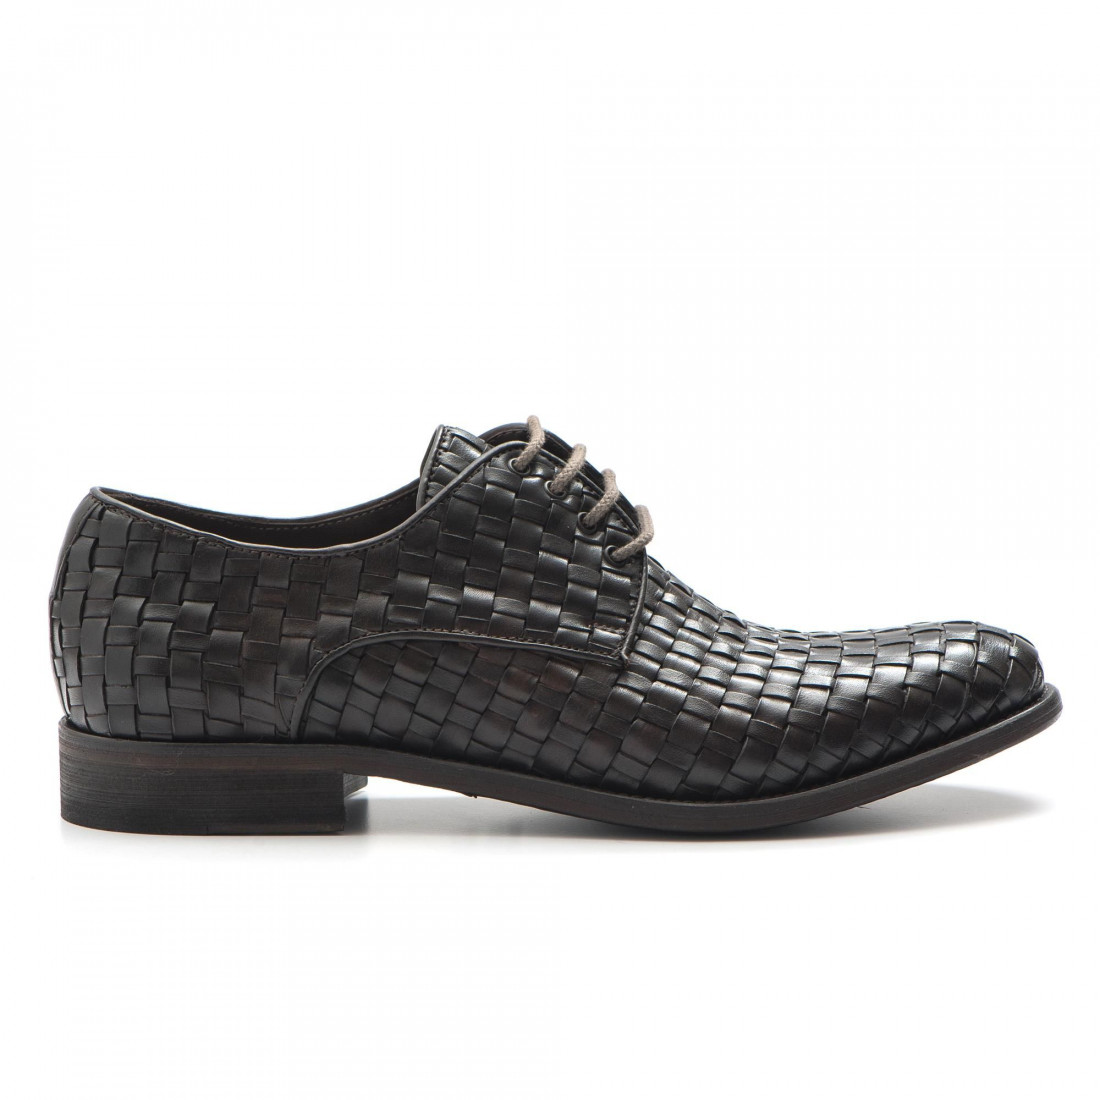 Derby shoes in soft brown woven leather